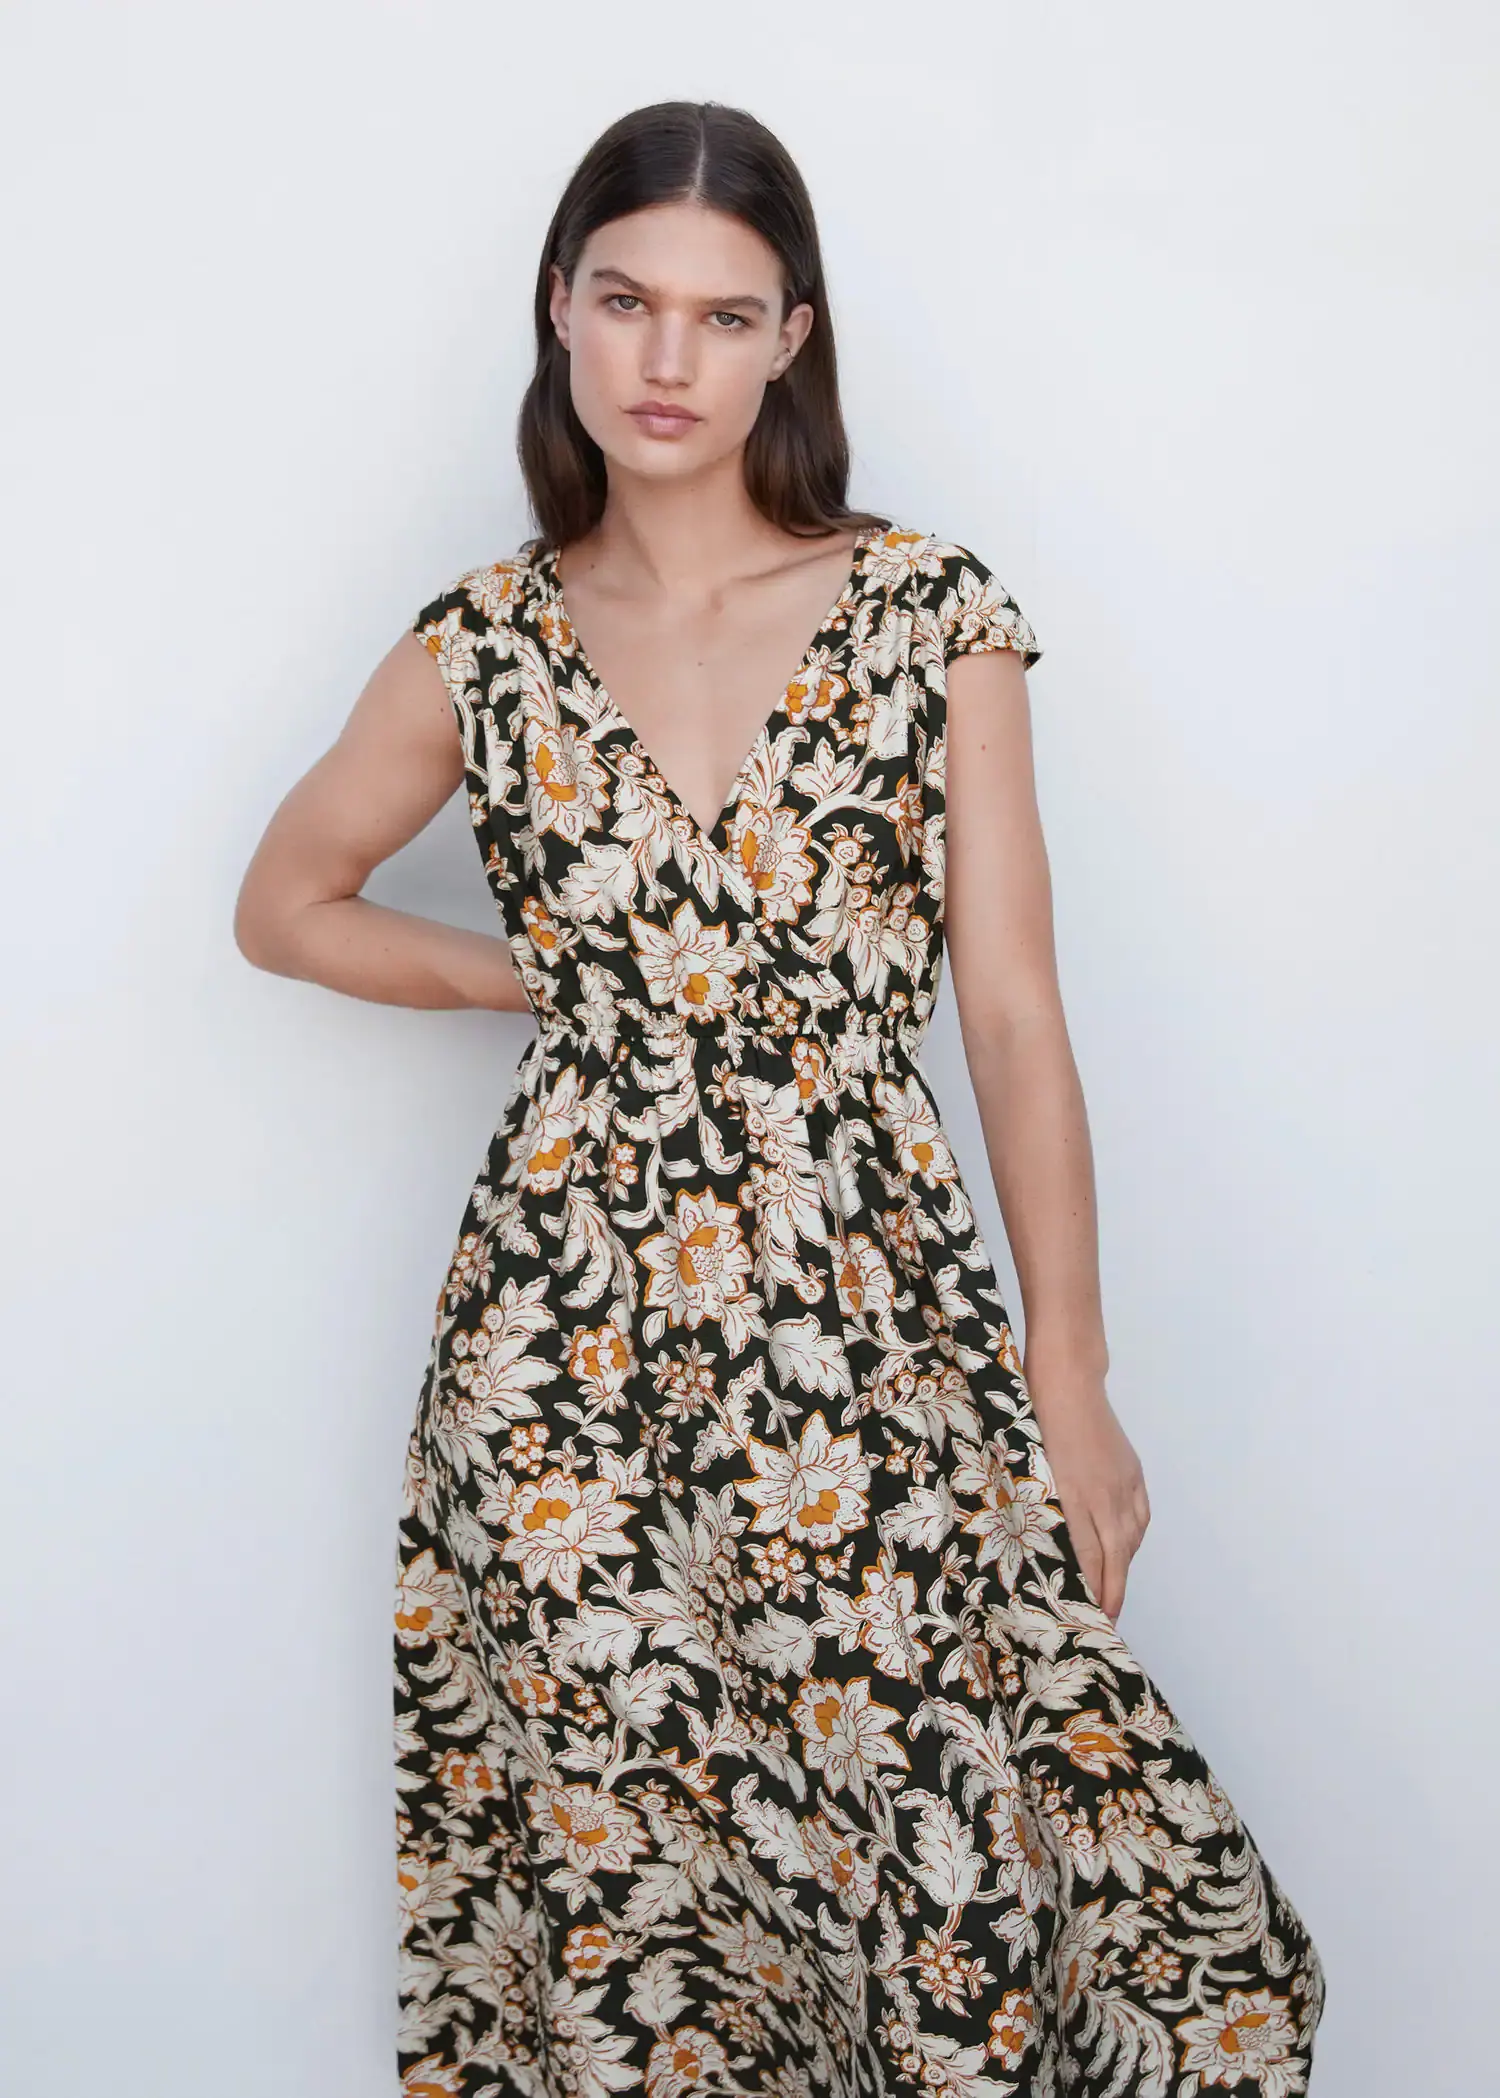 Mango Floral wrap neckline dress. a woman in a floral dress posing for a picture. 